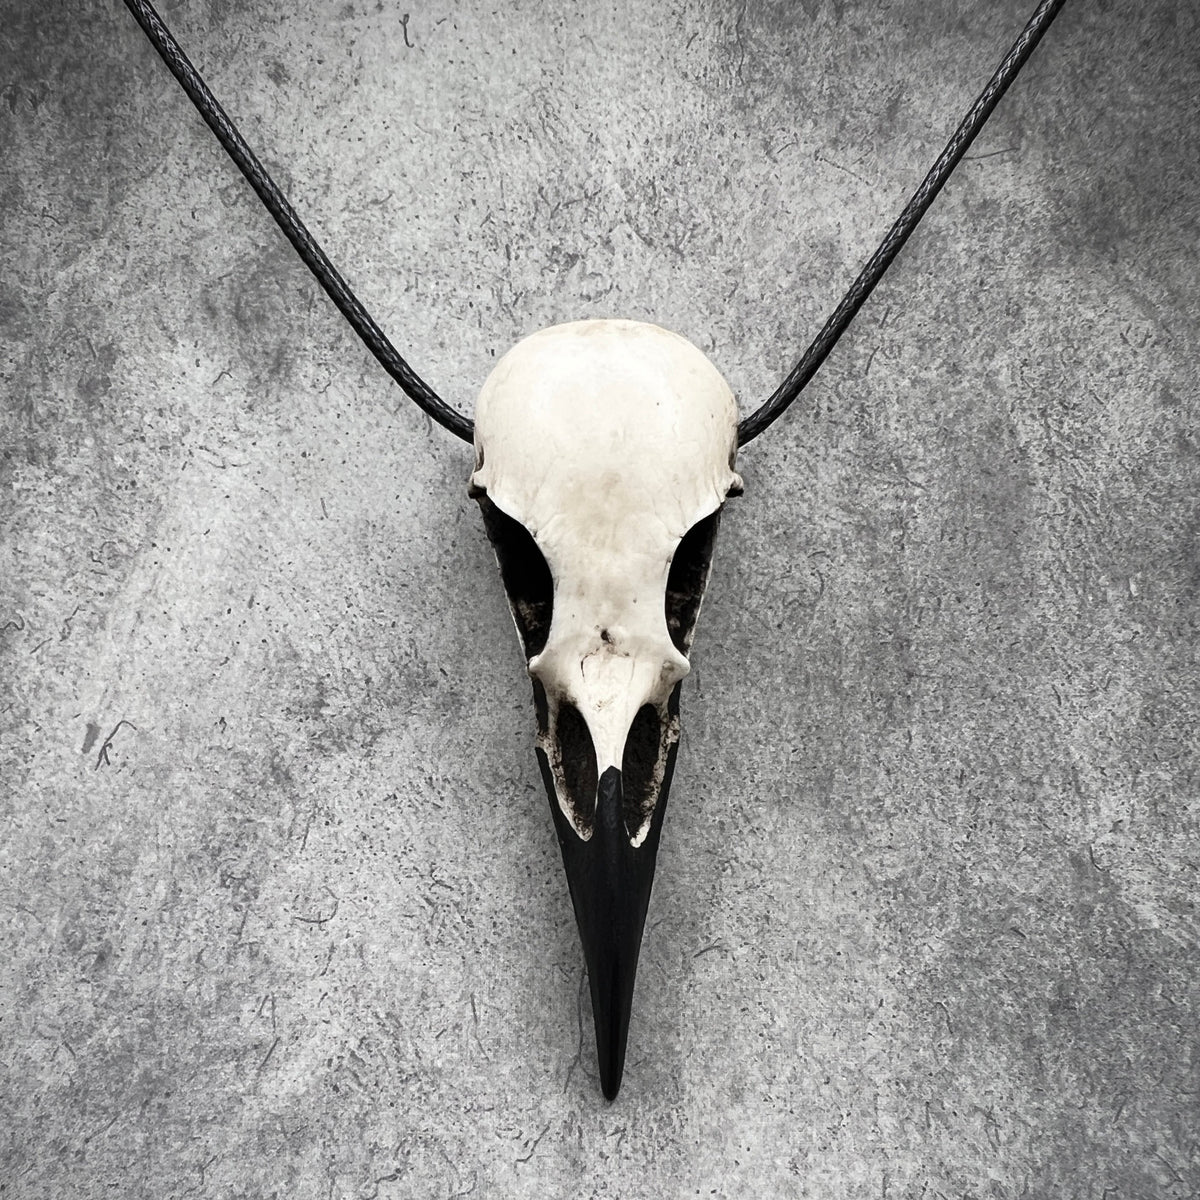 Skull festival necklace for dark creepy outfit goth style. A raven skull pendant made of resin. 